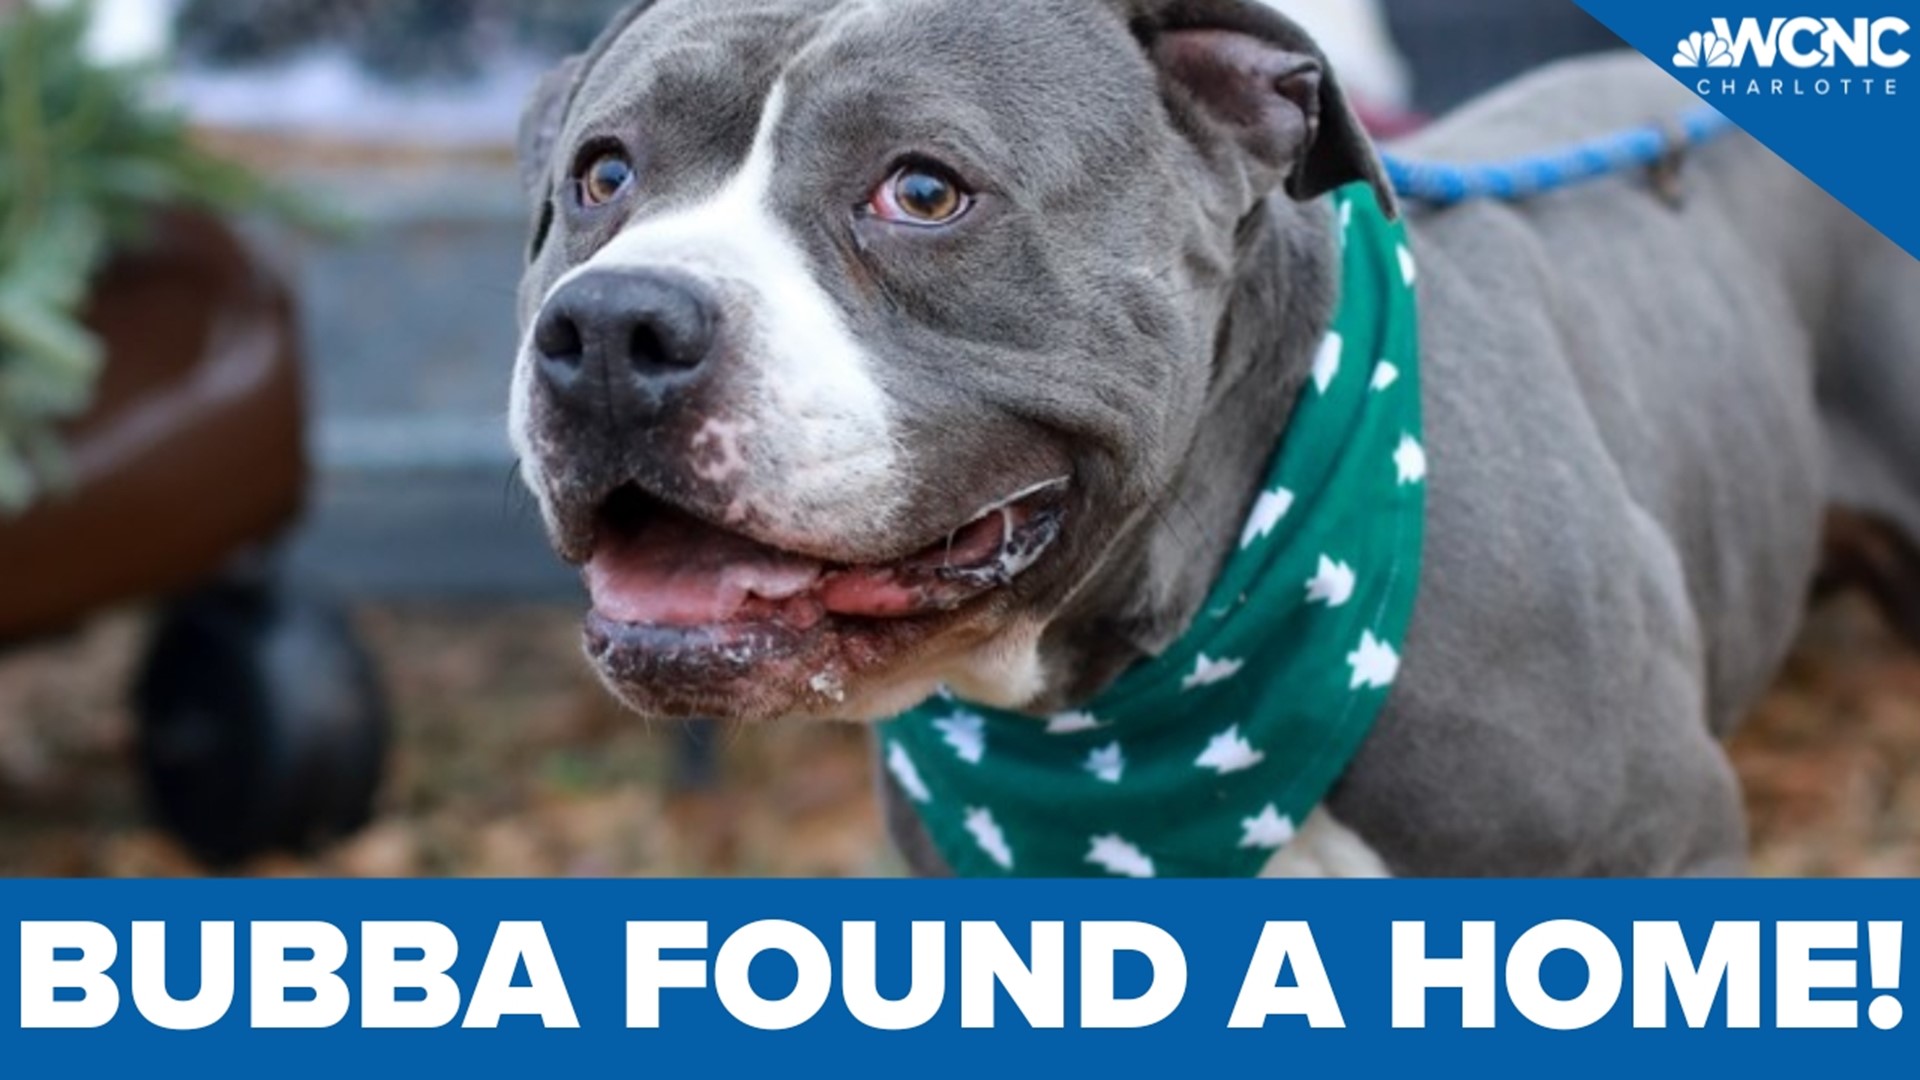 "Bubba came in as a stray," Heather Harrigan, a shelter volunteer, said in December. "He had a major axe wound on his head."